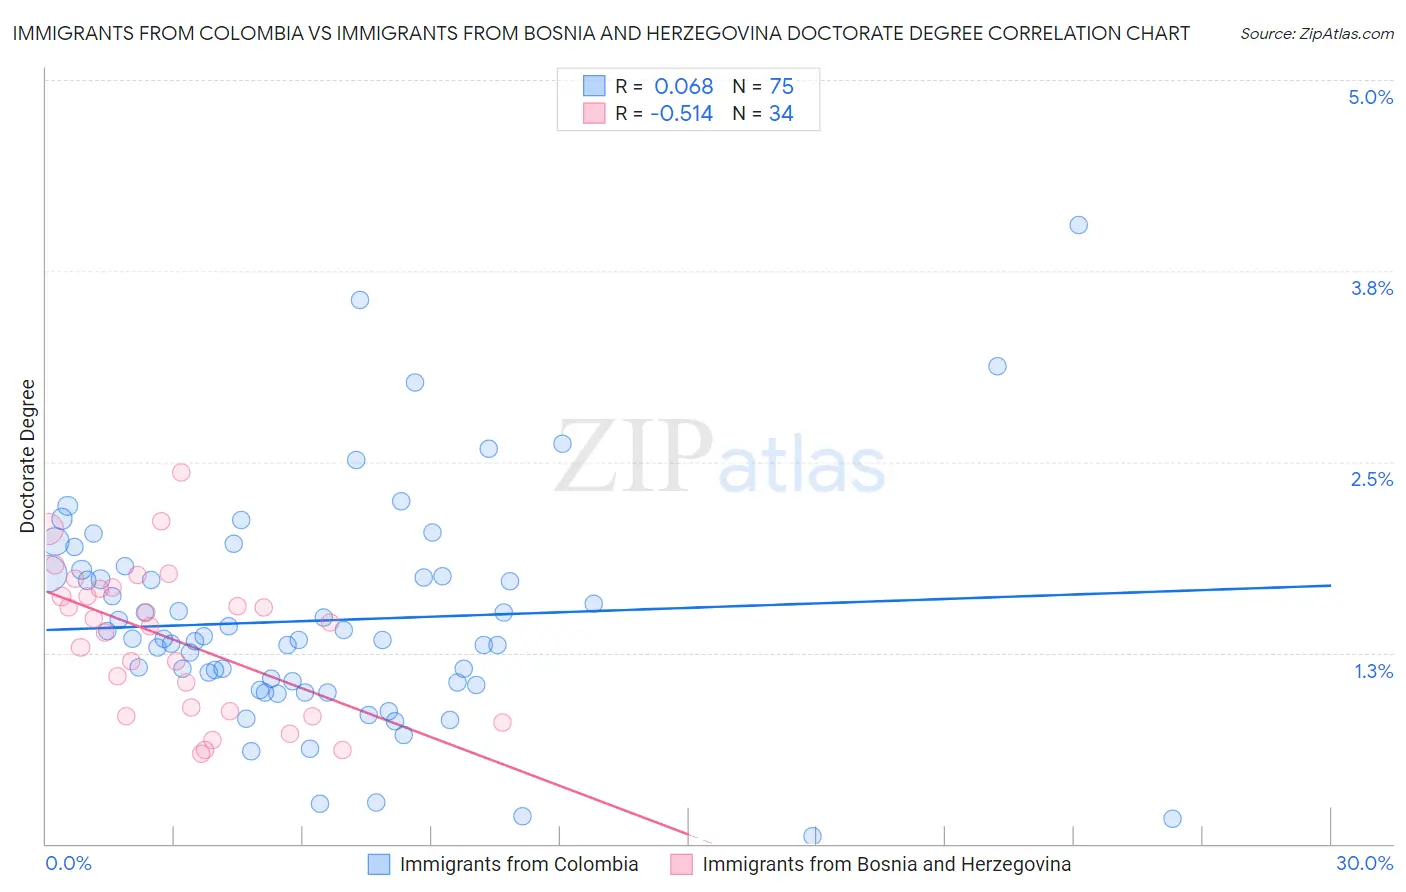 Immigrants from Colombia vs Immigrants from Bosnia and Herzegovina Doctorate Degree